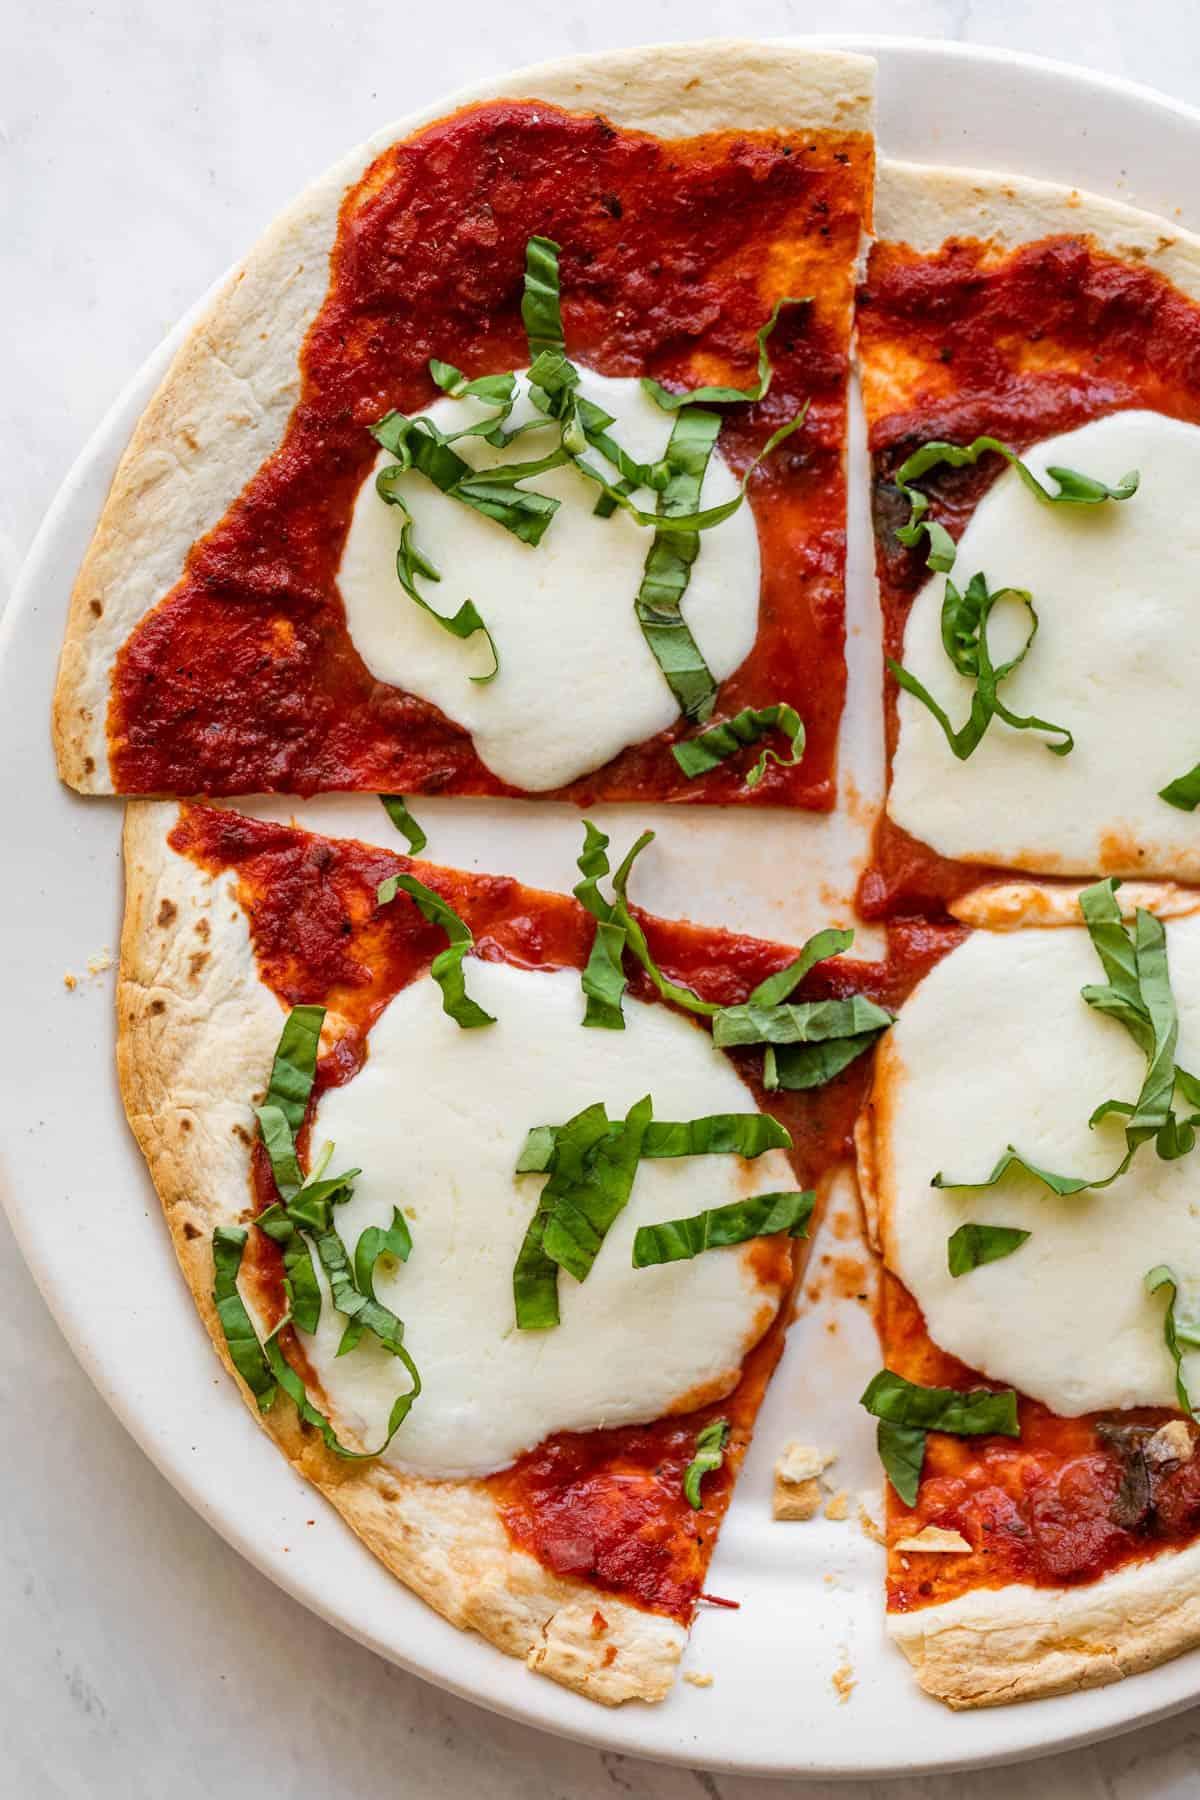 Get your pizza fix in 10 minutes with this tortilla take on pizza dough. (via <a href="https://feelgoodfoodie.net/recipe/tortilla-pizza/"><strong>Feel Good Foodie</strong></a>)